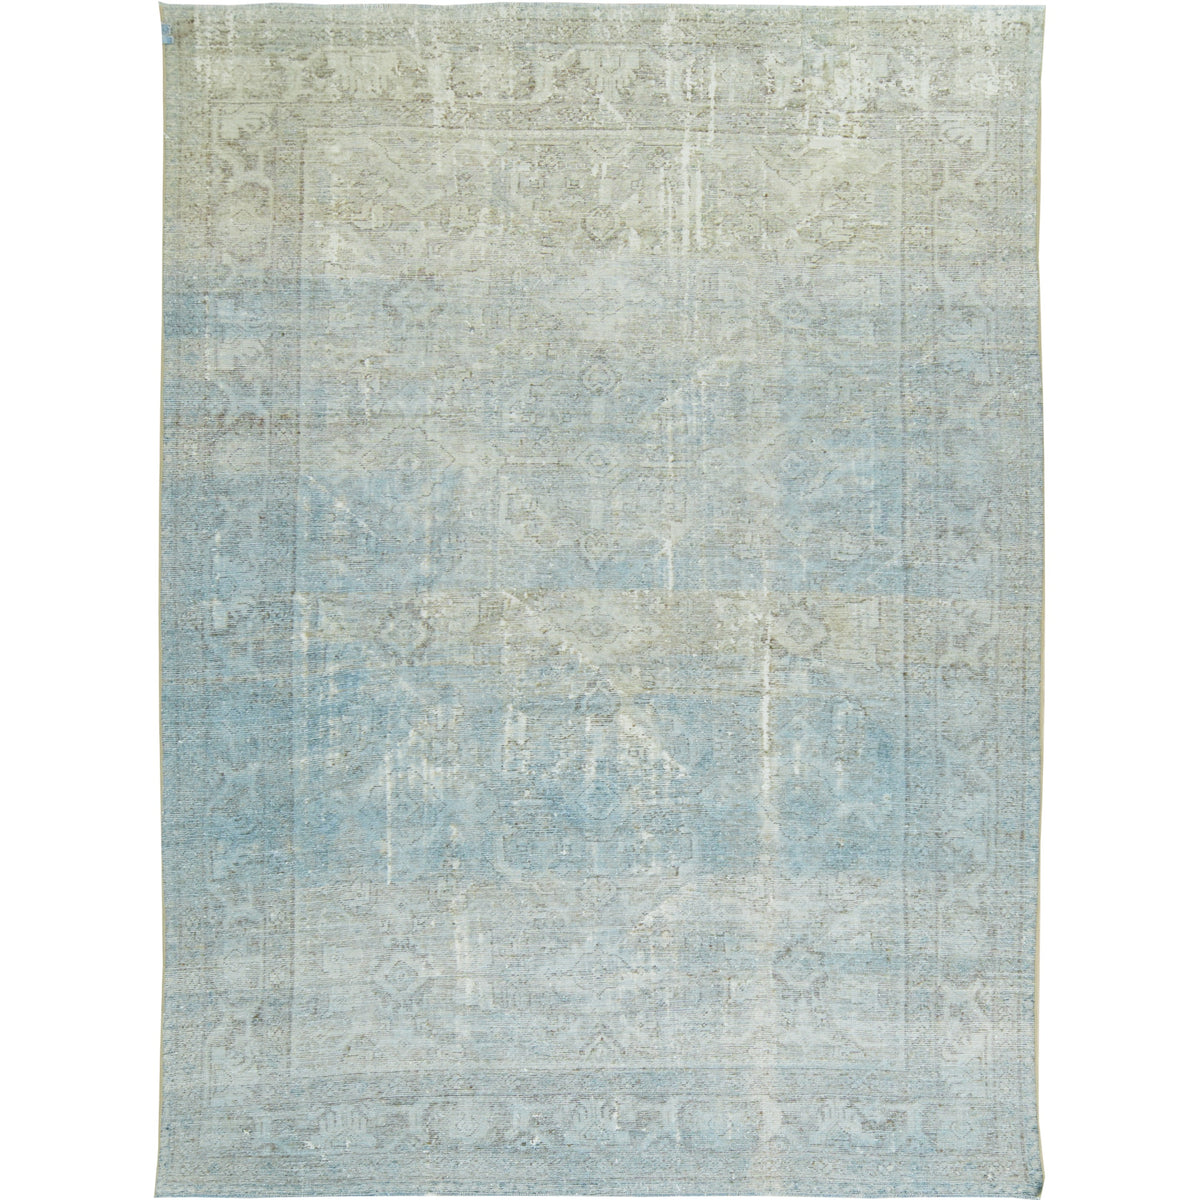 Rory - The Beige Tapestry of Persian Legacy | Kuden Rugs